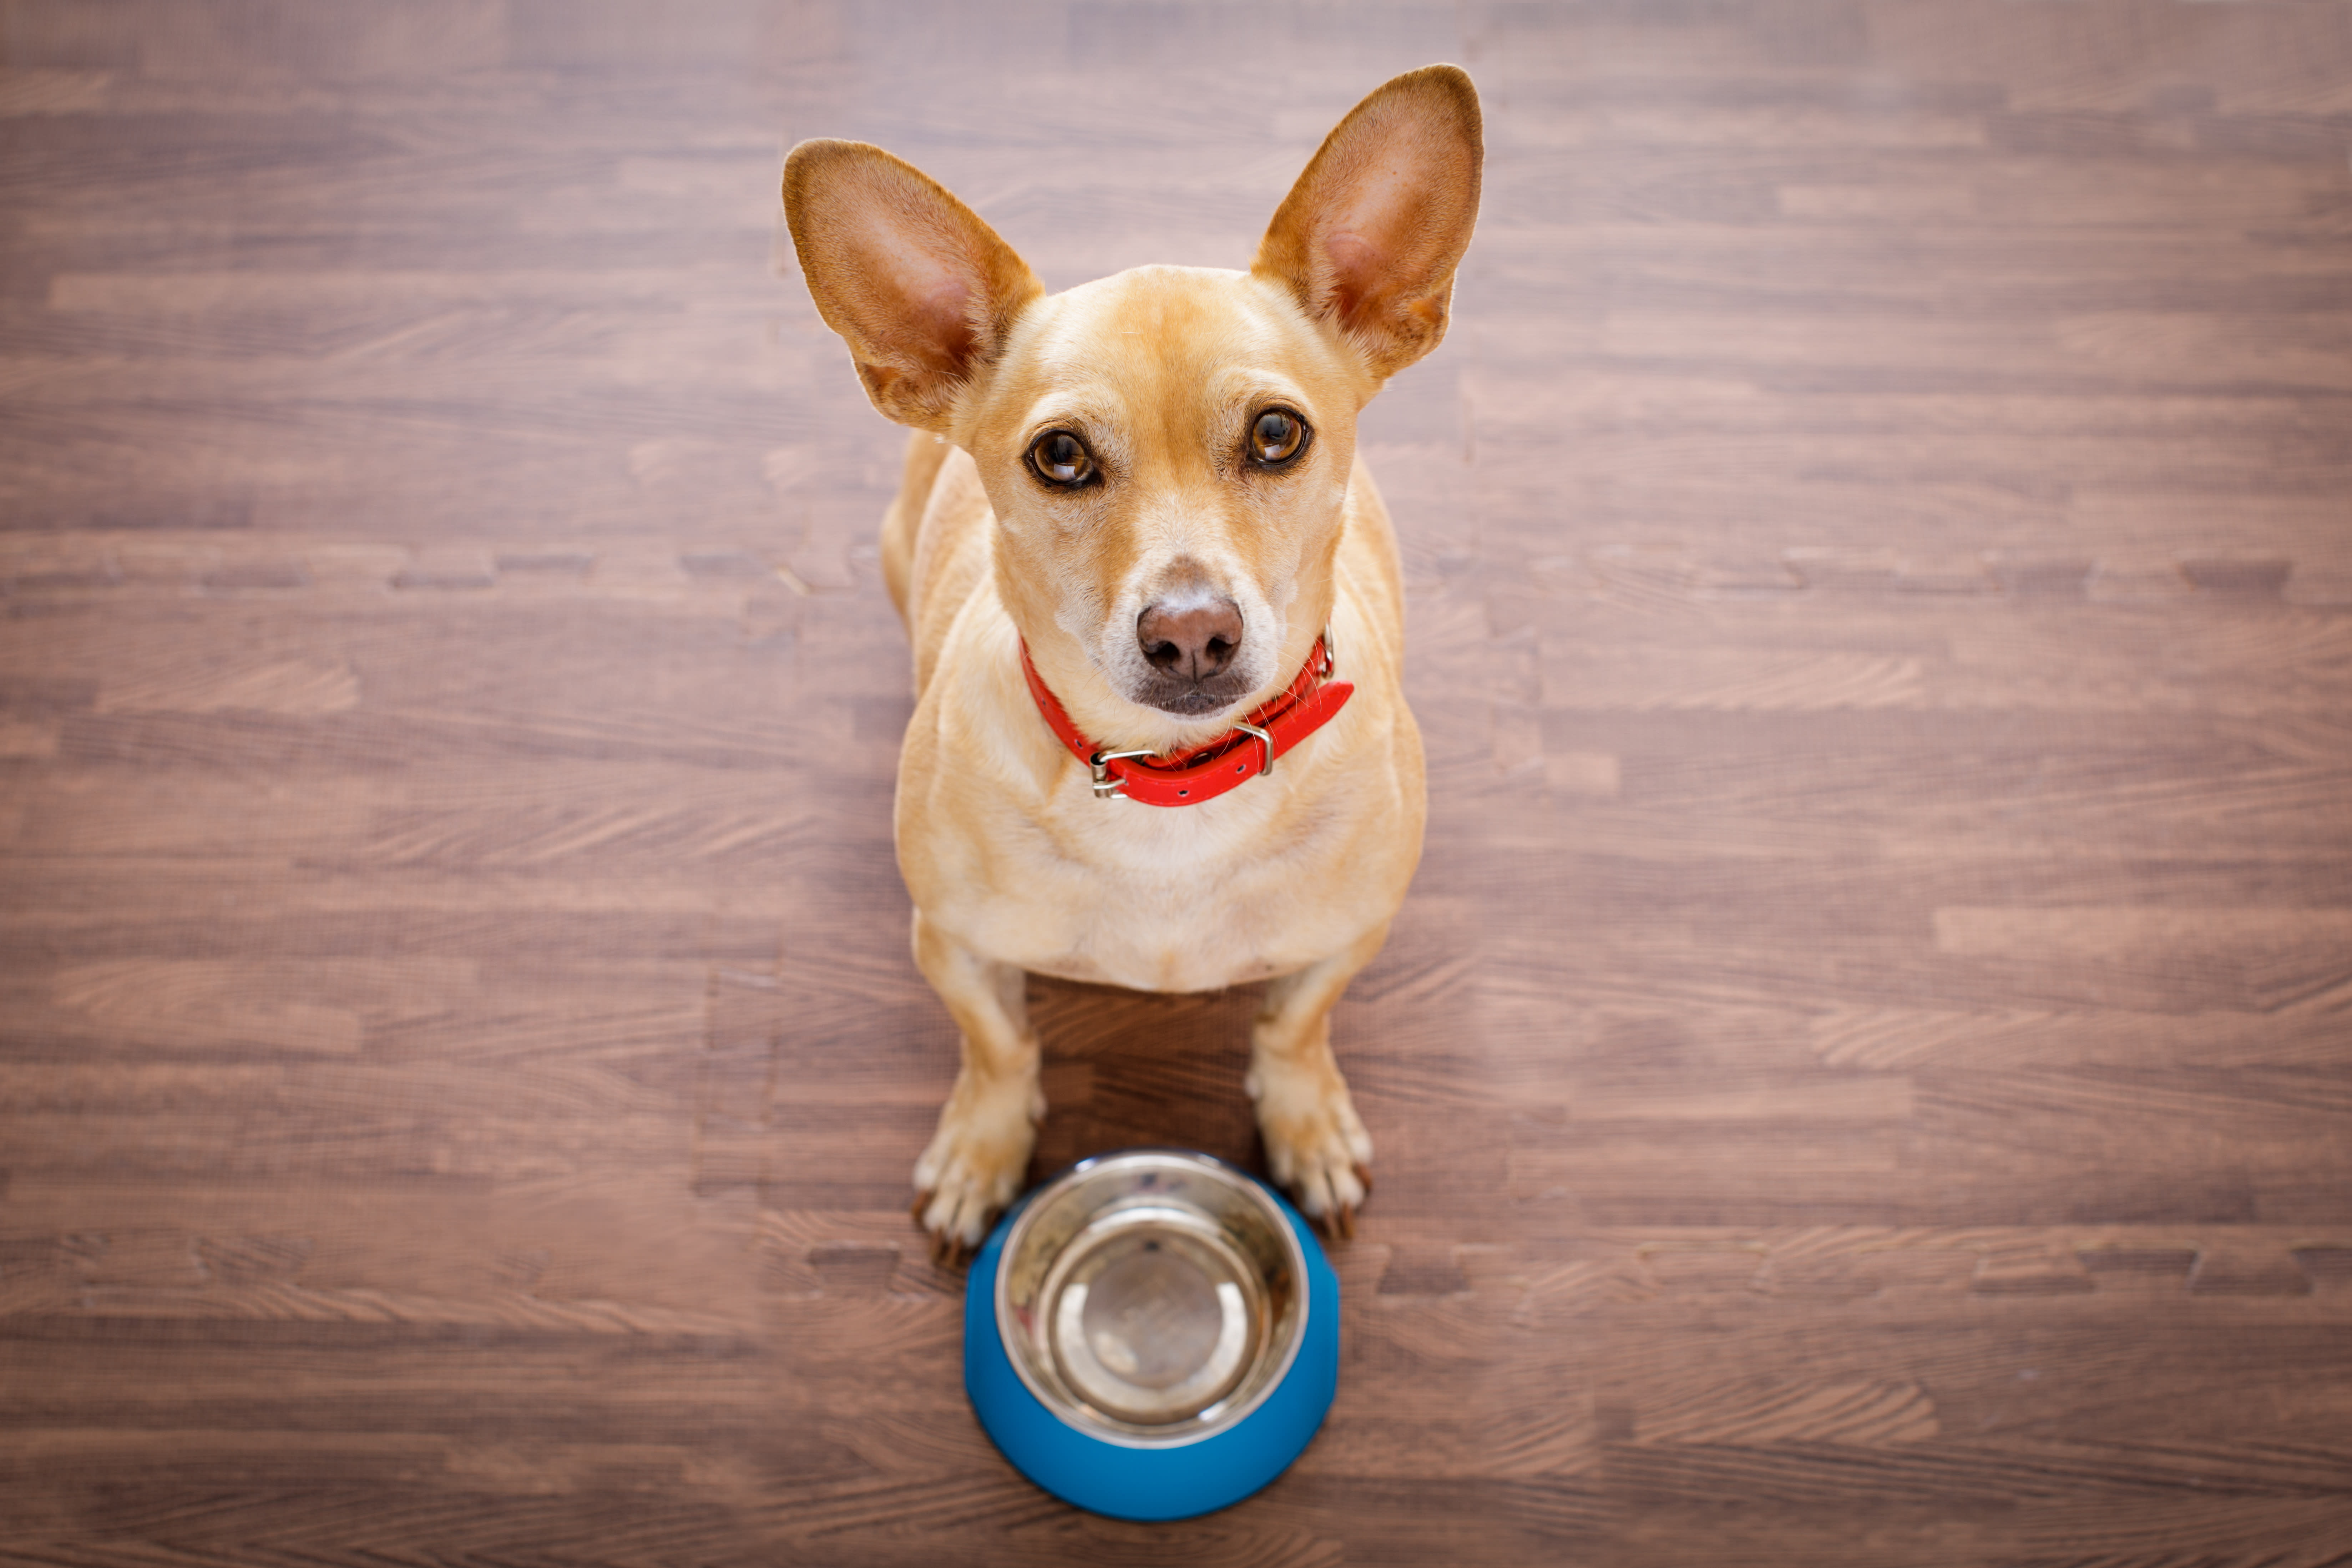 Dogs love Amazon's super-healthy Wag kibble—and it's a whopping 40 percent off right now